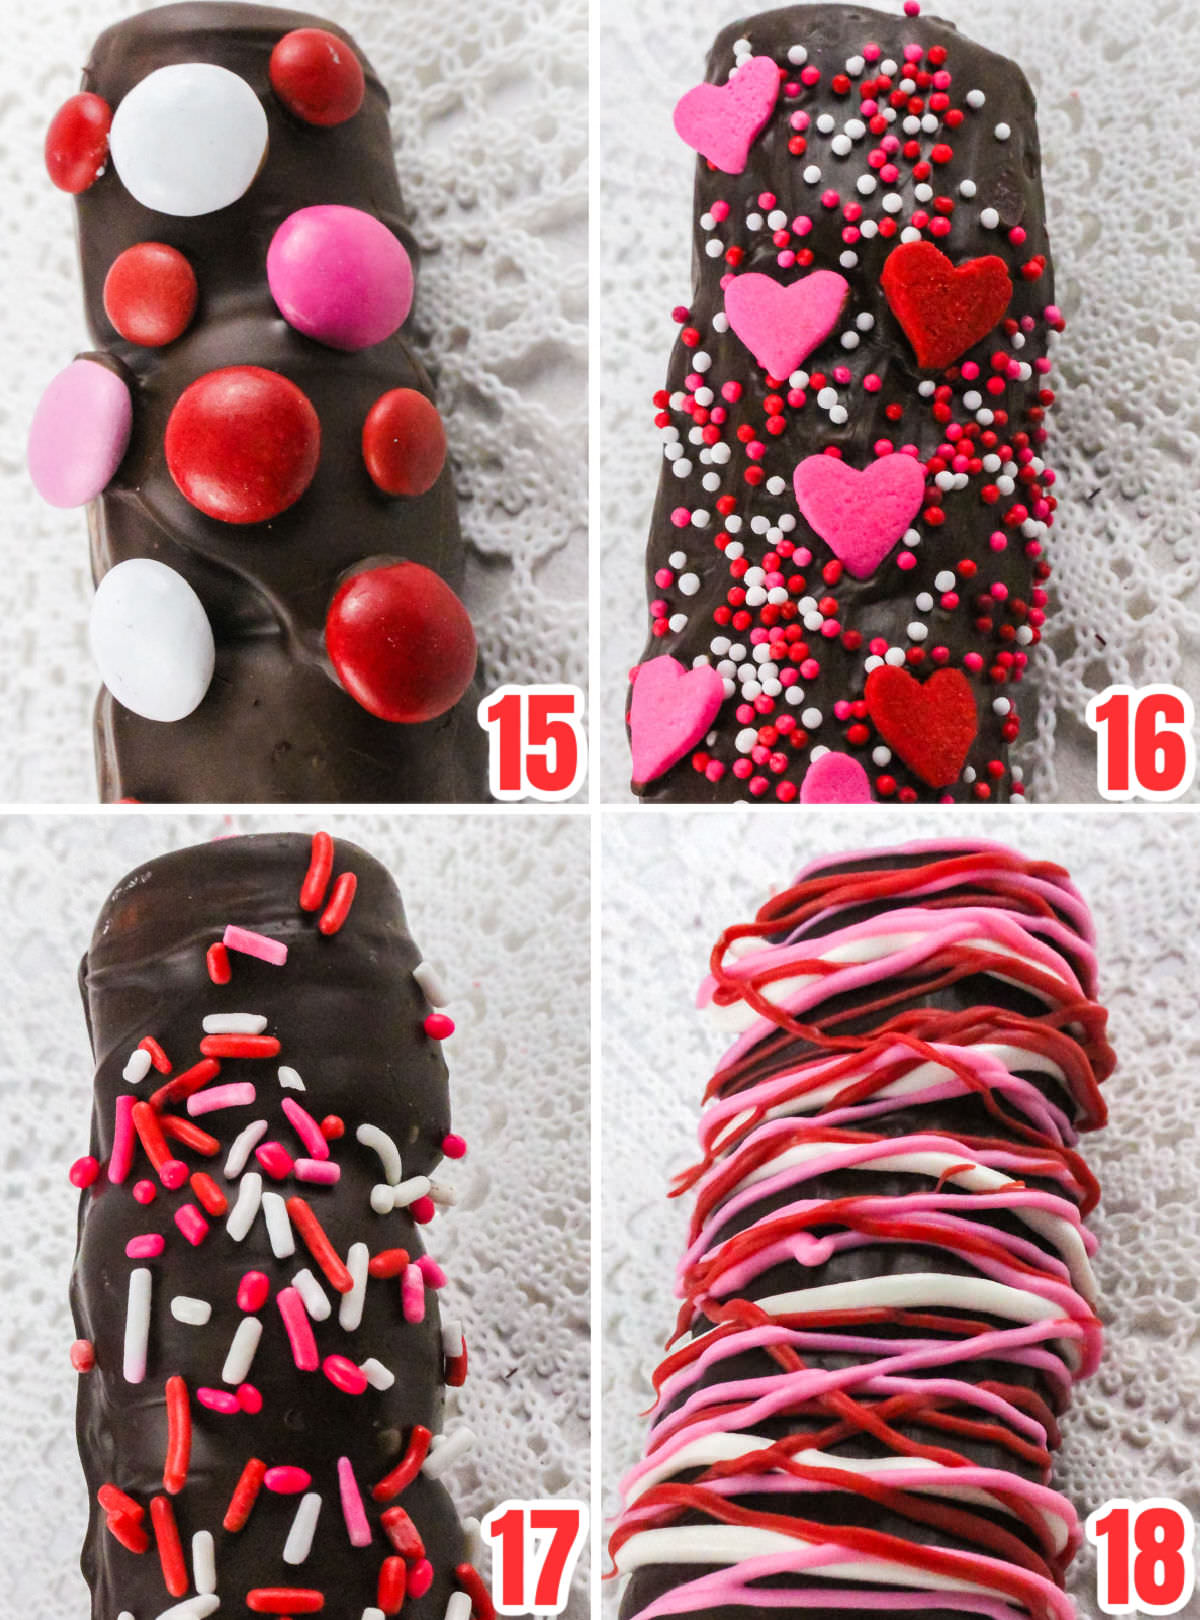 Collage image showing four different decorating ideas for the Valentine's Day Marshmallow Wands.